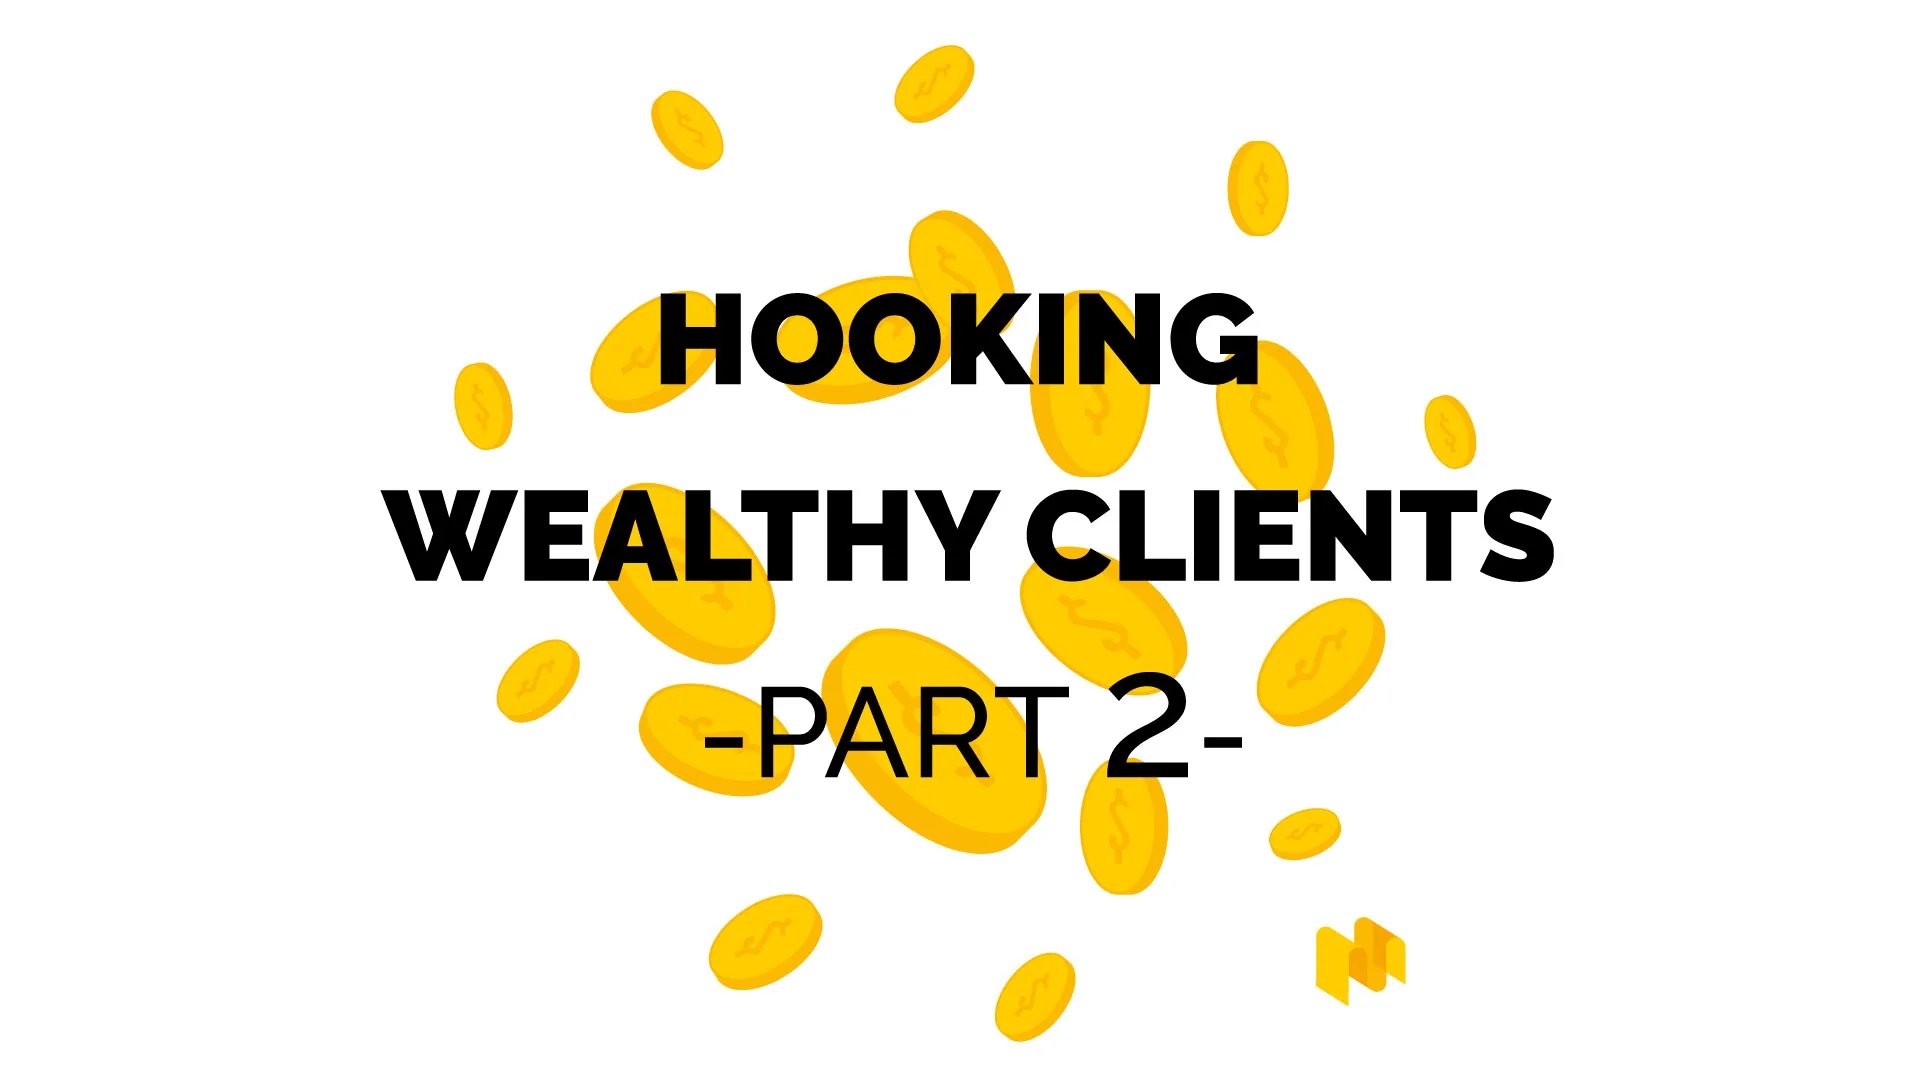 10 Ways To Attract Wealthy Clients (Part 2)